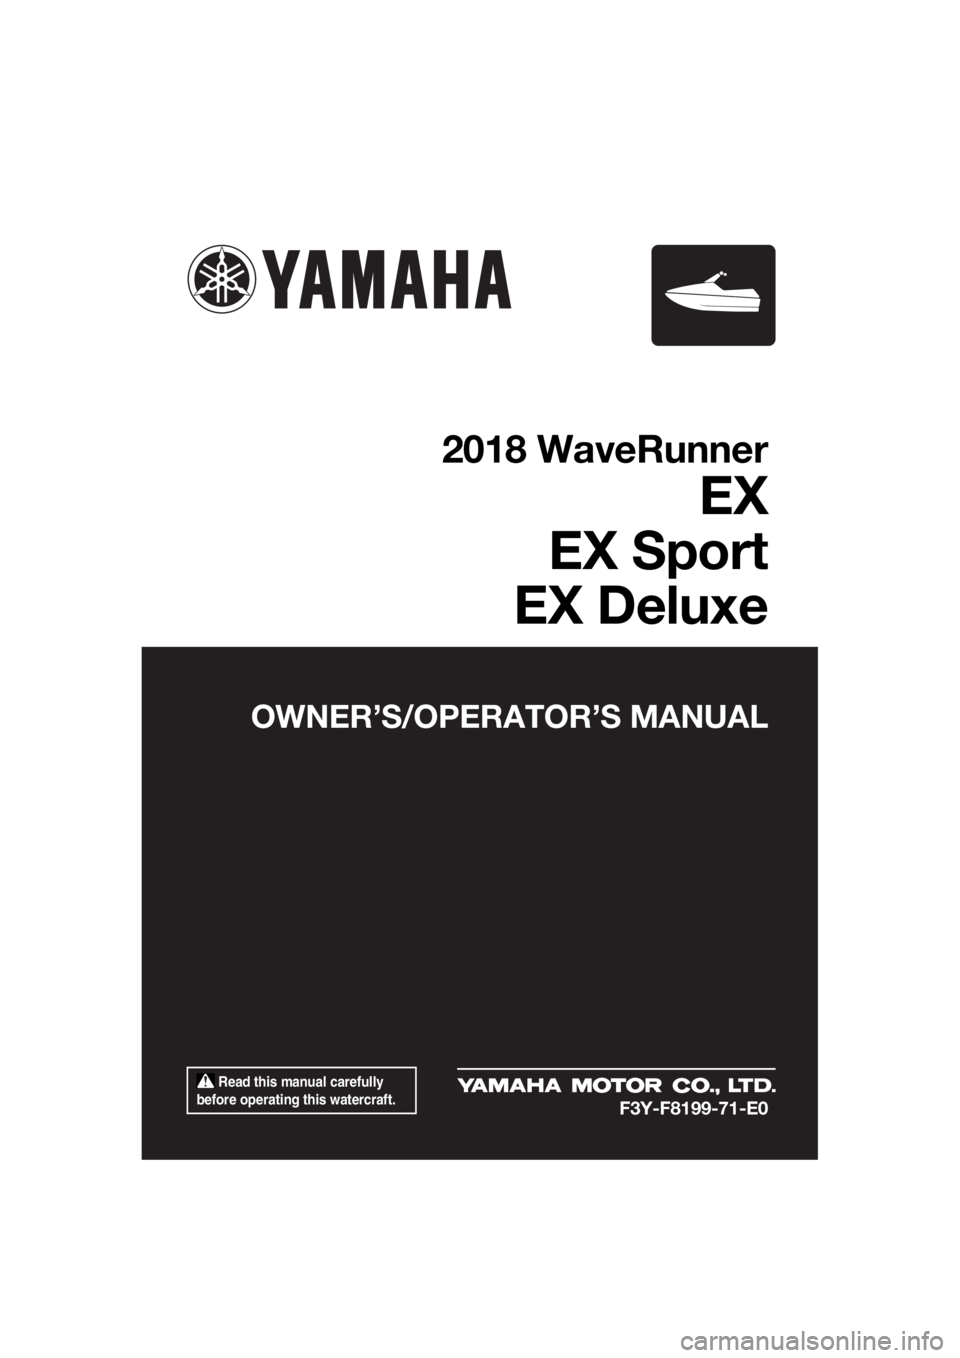 YAMAHA EX DELUXE 2018  Owners Manual  Read this manual carefully 
before operating this watercraft.
OWNER’S/OPERATOR’S MANUAL
2018 WaveRunner
EX
EX Sport
EX Deluxe
F3Y-F8199-71-E0
UF3Y71E0.book  Page 1  Thursday, May 25, 2017  11:17 